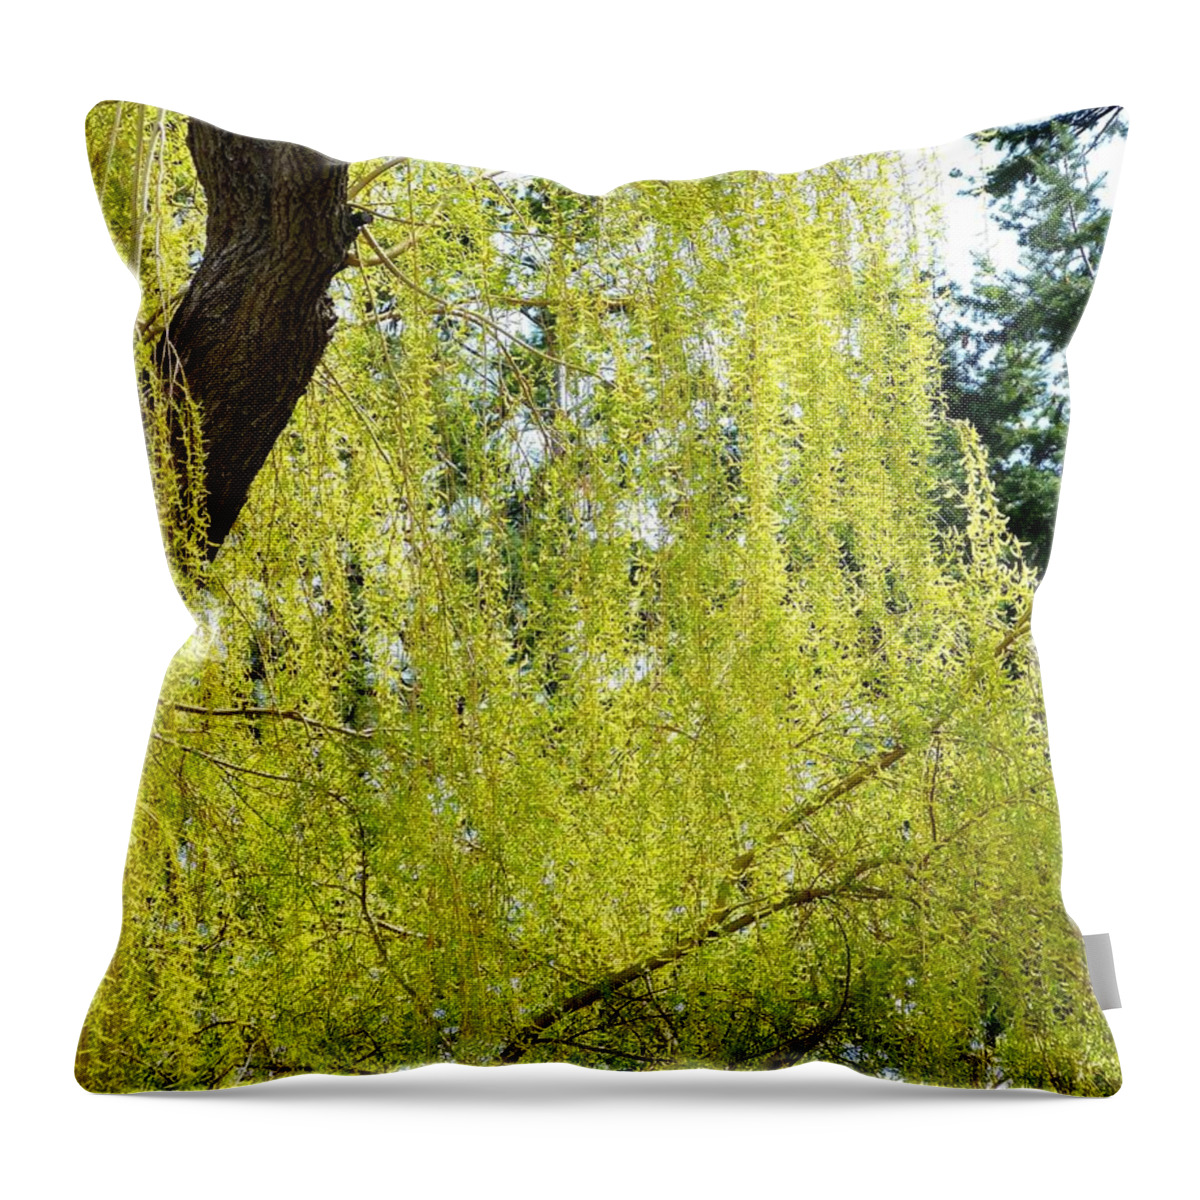 Spring Weeping Willow Throw Pillow featuring the photograph Spring Weeping Willow by Will Borden